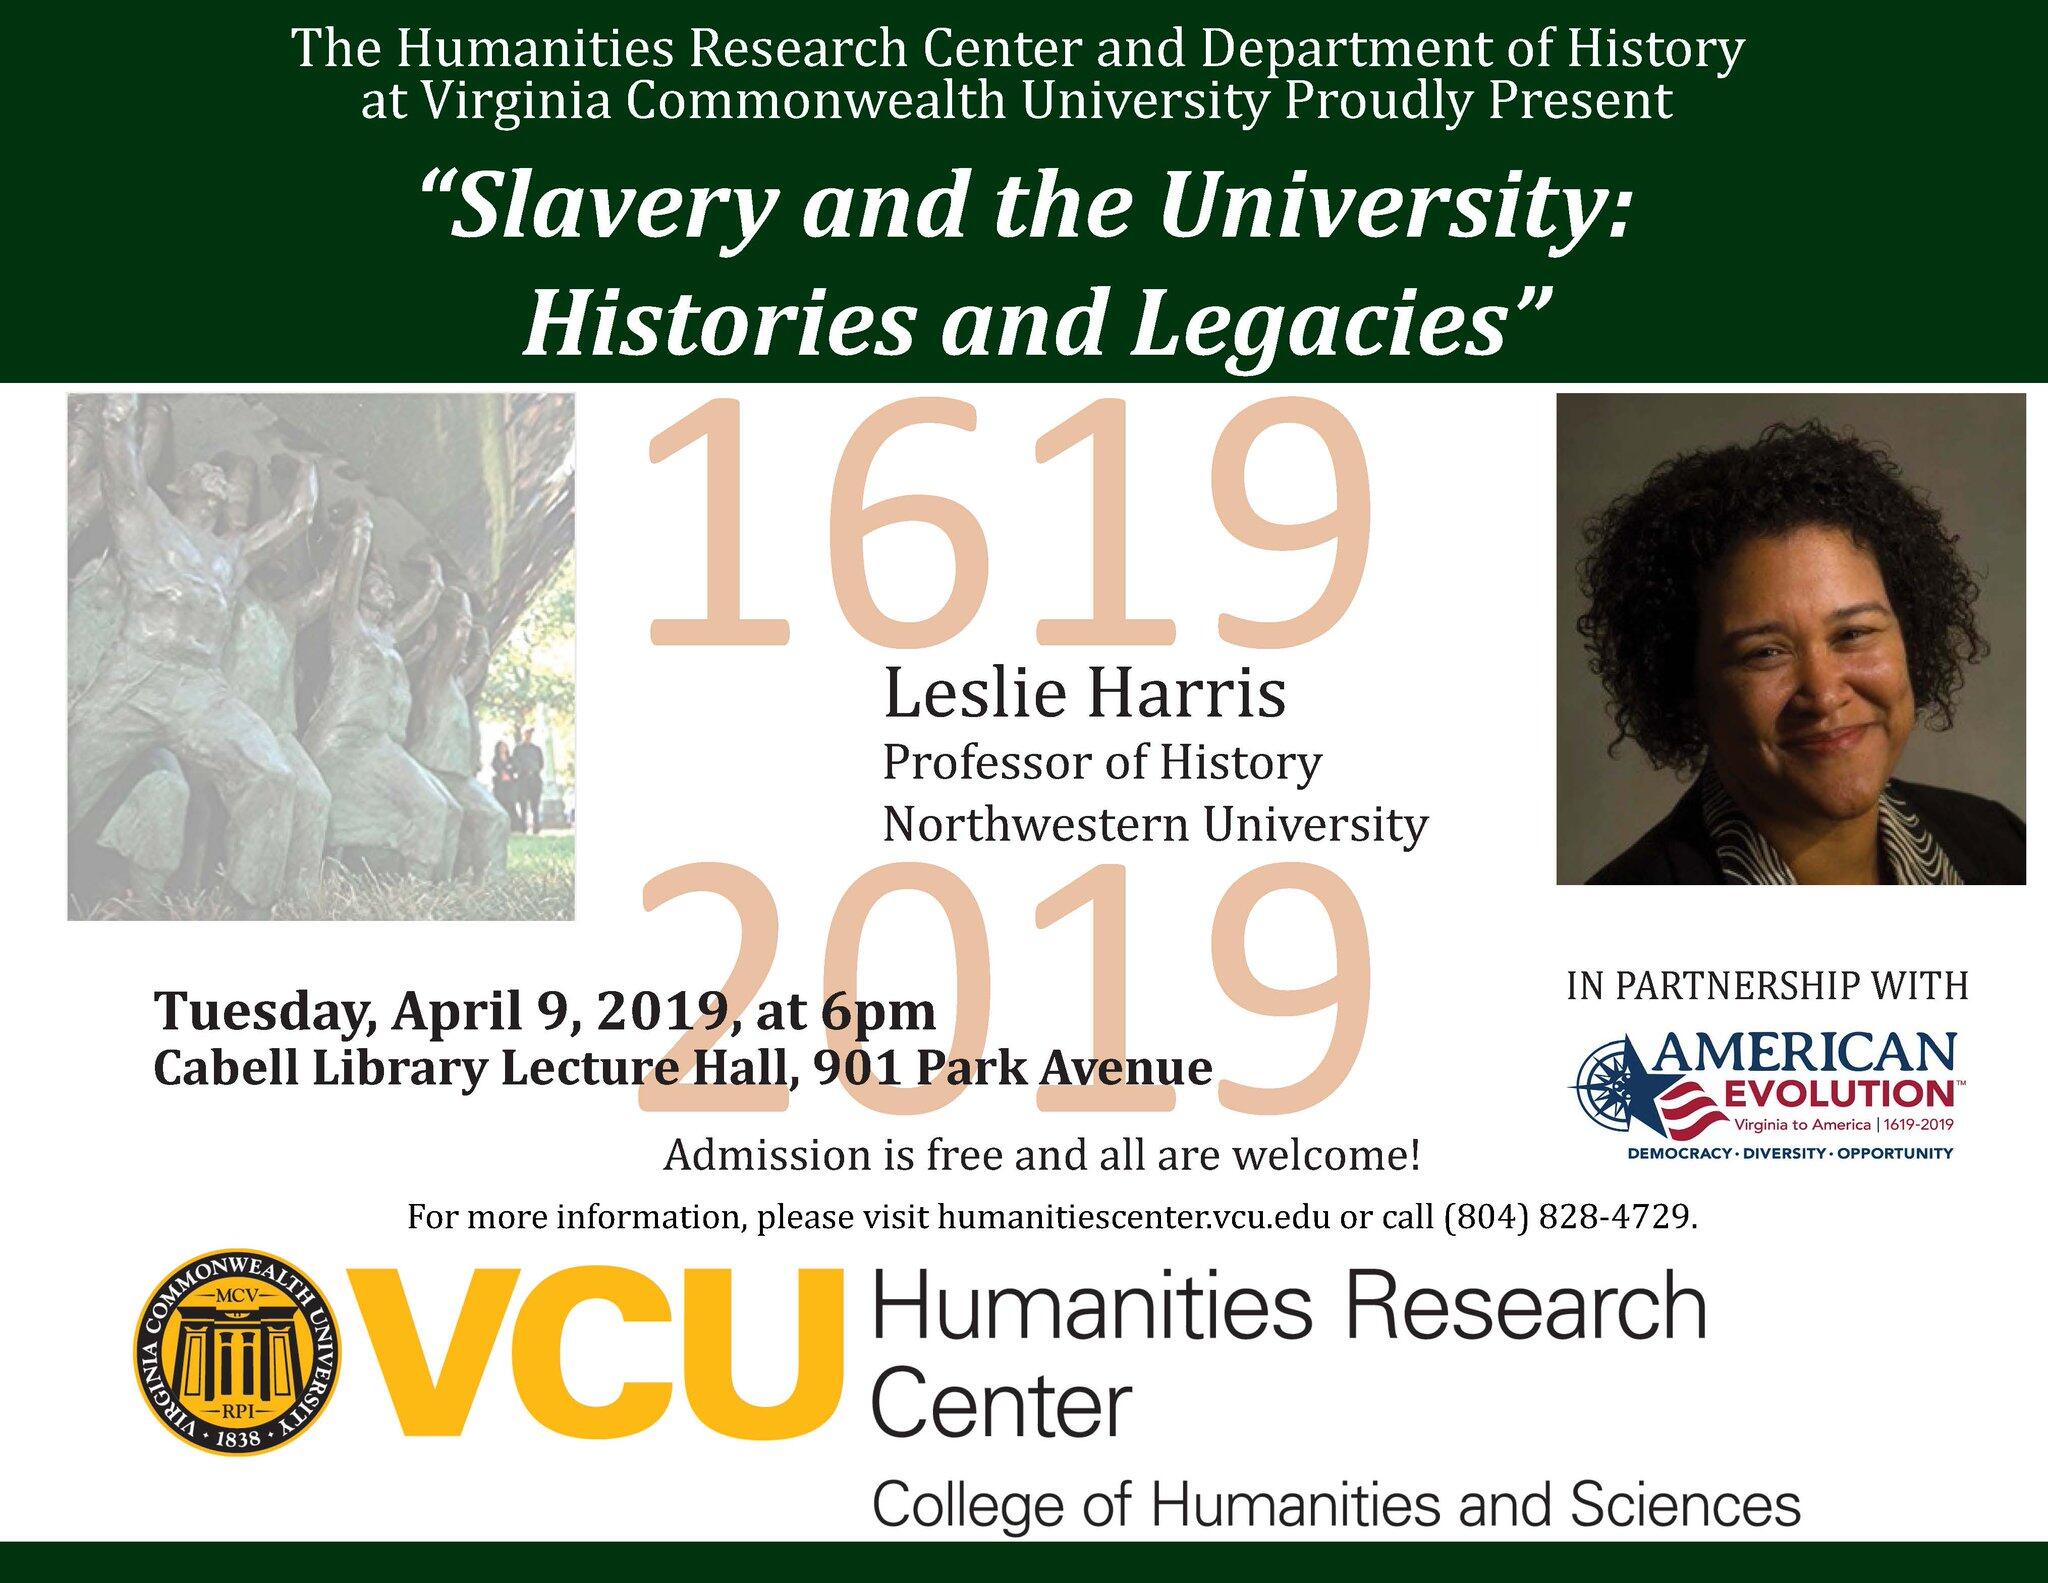 Leslie Harris will give a lecture on “Slavery and the University: Histories and Legacies” on April 9 in the James Branch Cabell Library Lecture Hall.